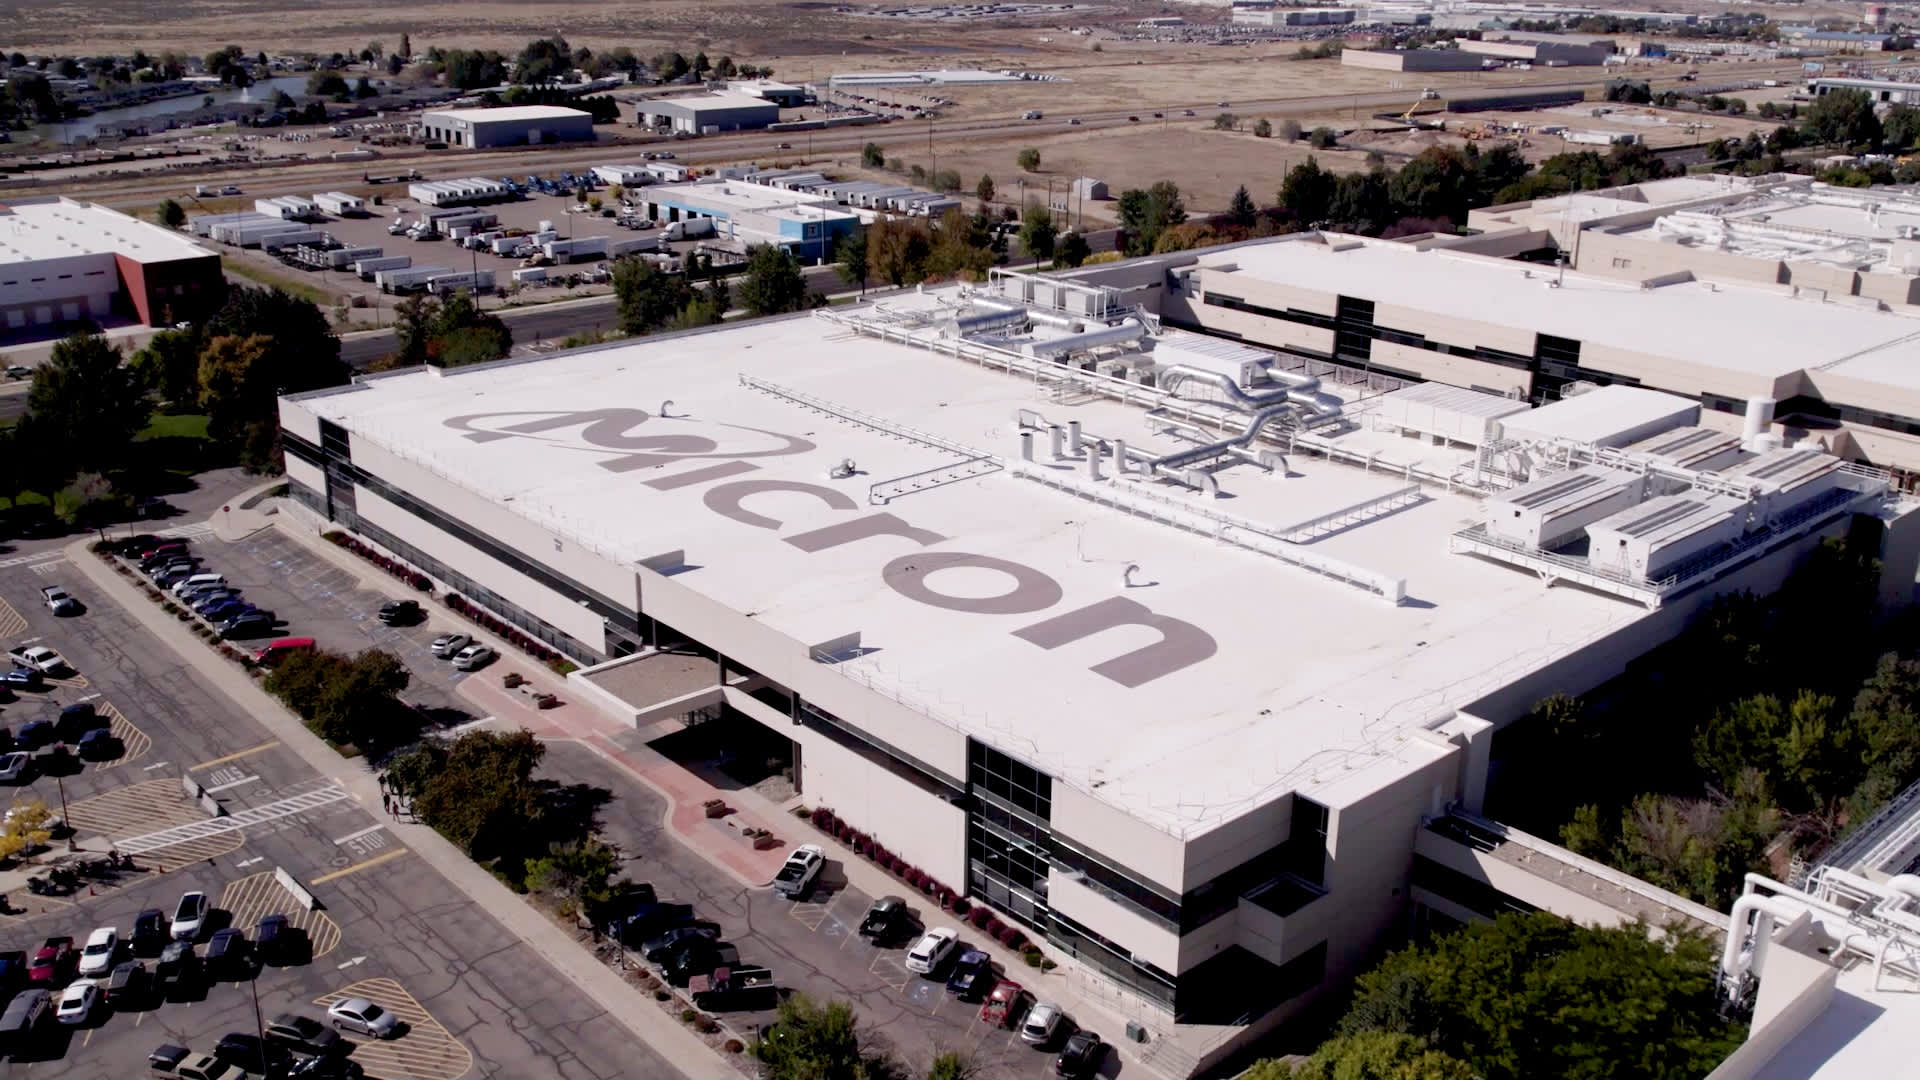 Micron's existing research and development facility in Boise, Idaho, shown here on Oct. 6, 2023.